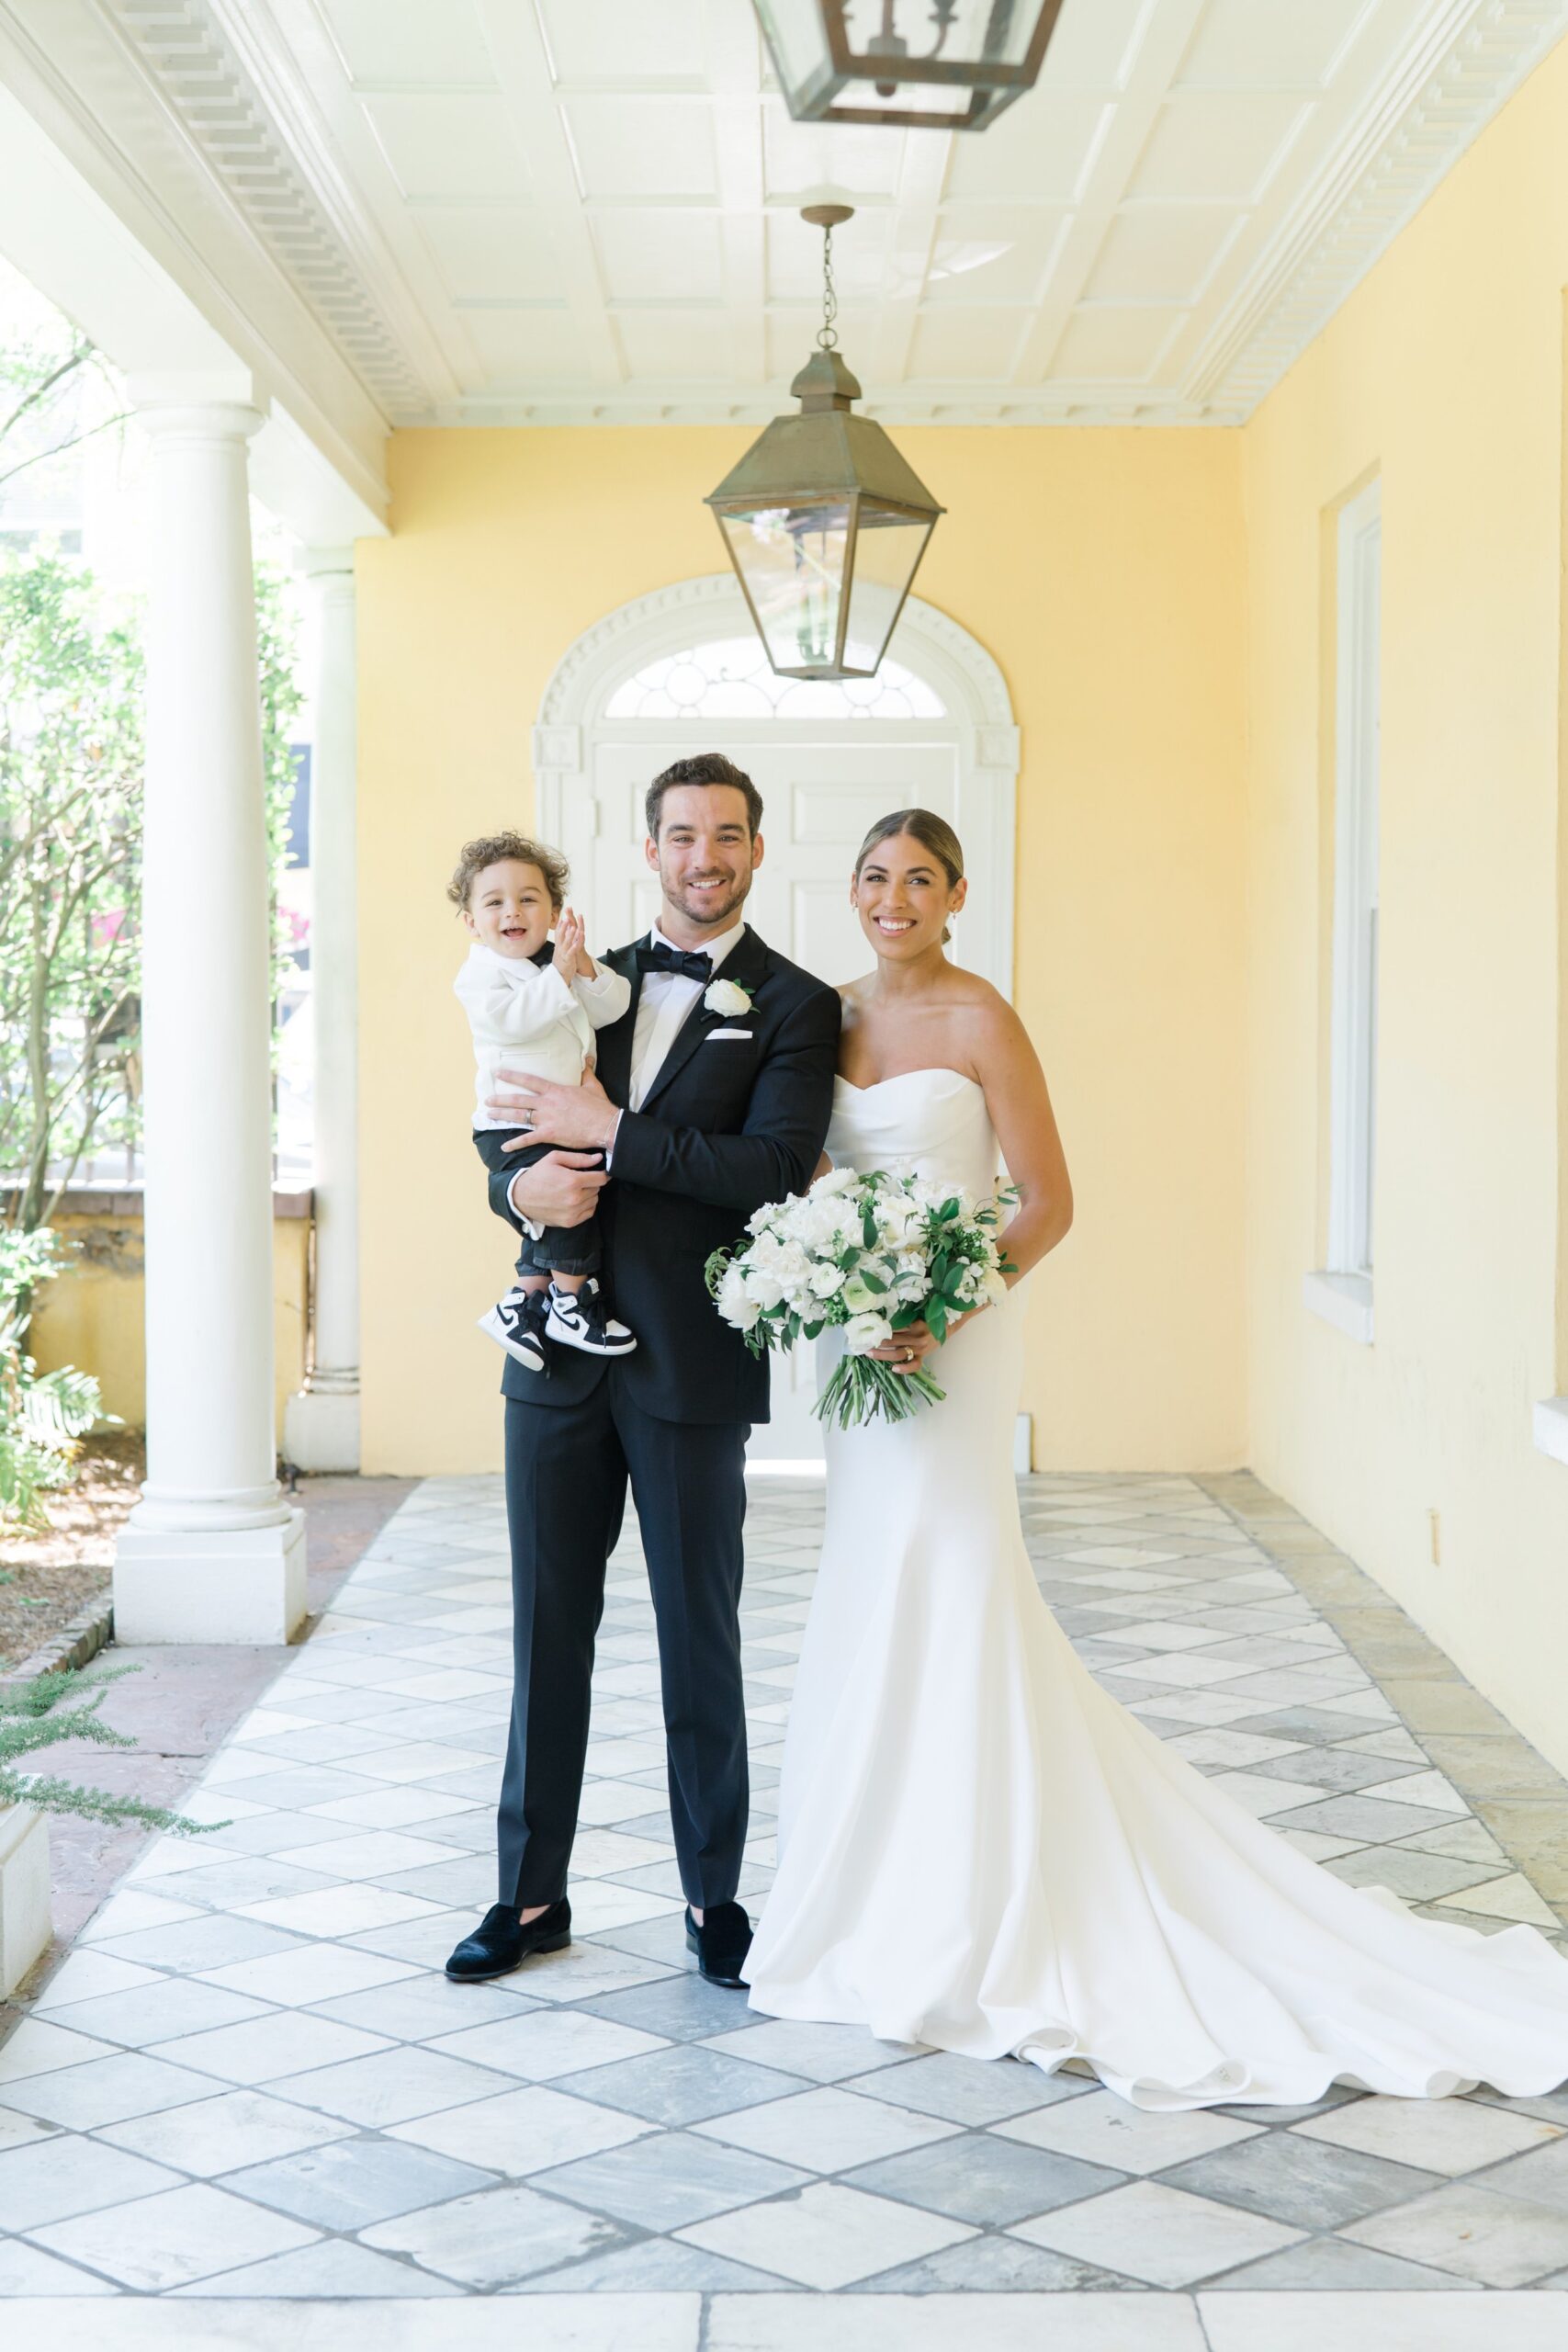 Bride and groom with son on wedding day.